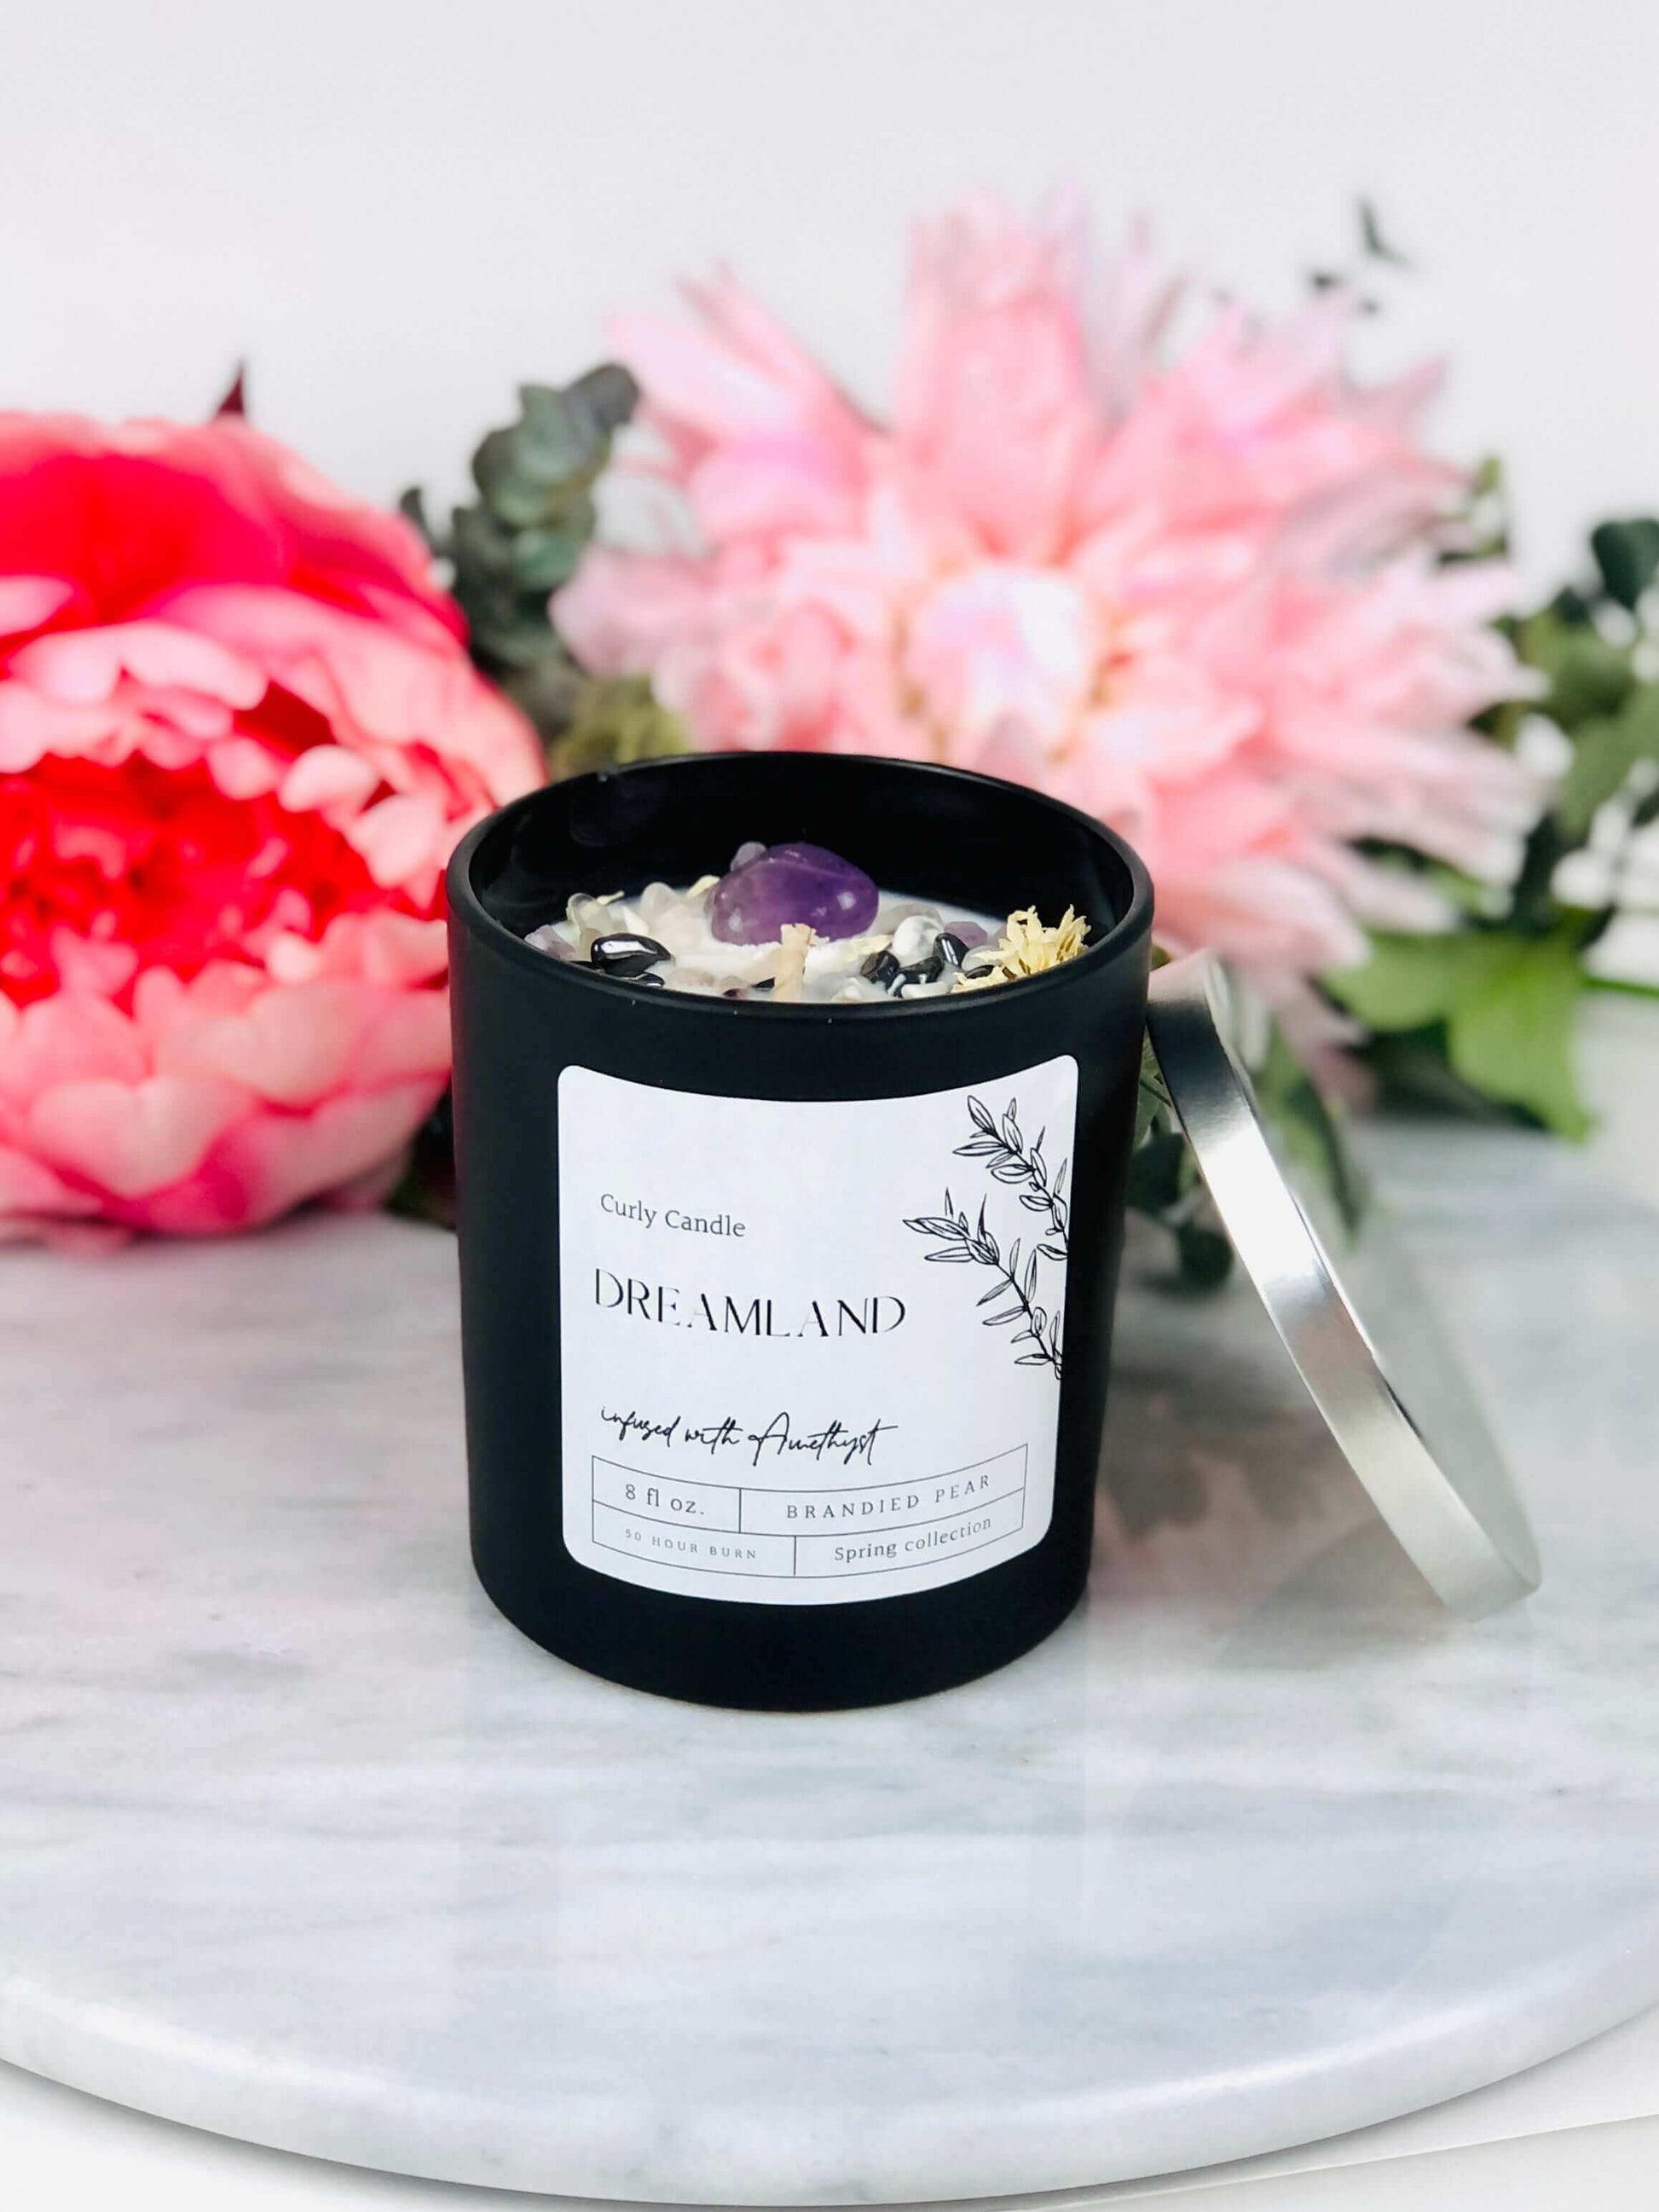 Crystal Candle For Restful Sleep Dreamland Candle